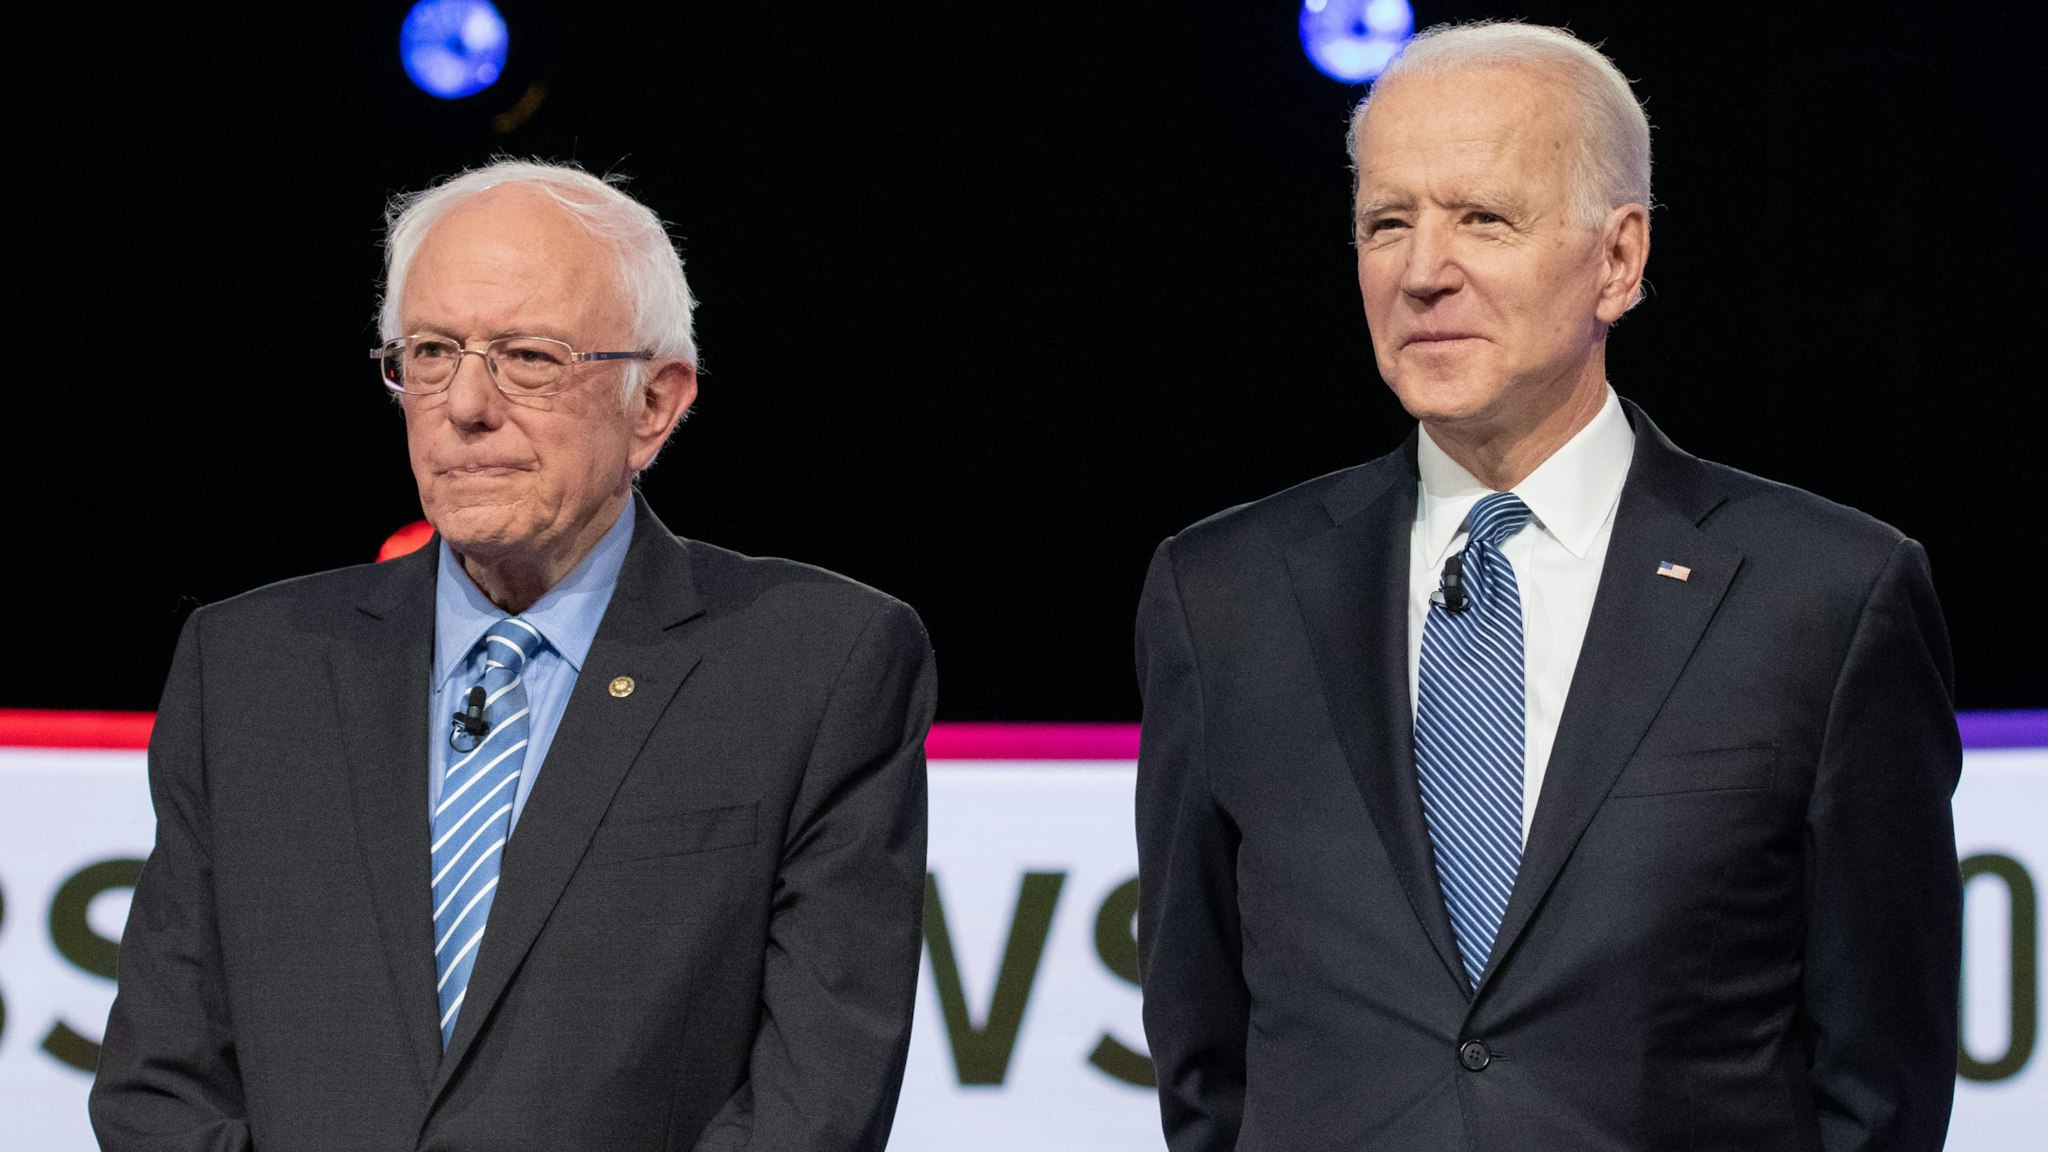 2020 presidential candidates Senator Bernie Sanders, an Independent from Vermont, left, and former Vice President Joe Biden arrive on stage ahead of the Democratic presidential debate in Charleston, South Carolina, U.S., on Tuesday, Feb. 25, 2020. Michael Bloomberg is trying for a do-over in Tuesdays Democratic presidential debate, previewing that hell turn his focus to newly minted front-runner Bernie Sanders after a much-criticized debut at last weeks face-off.